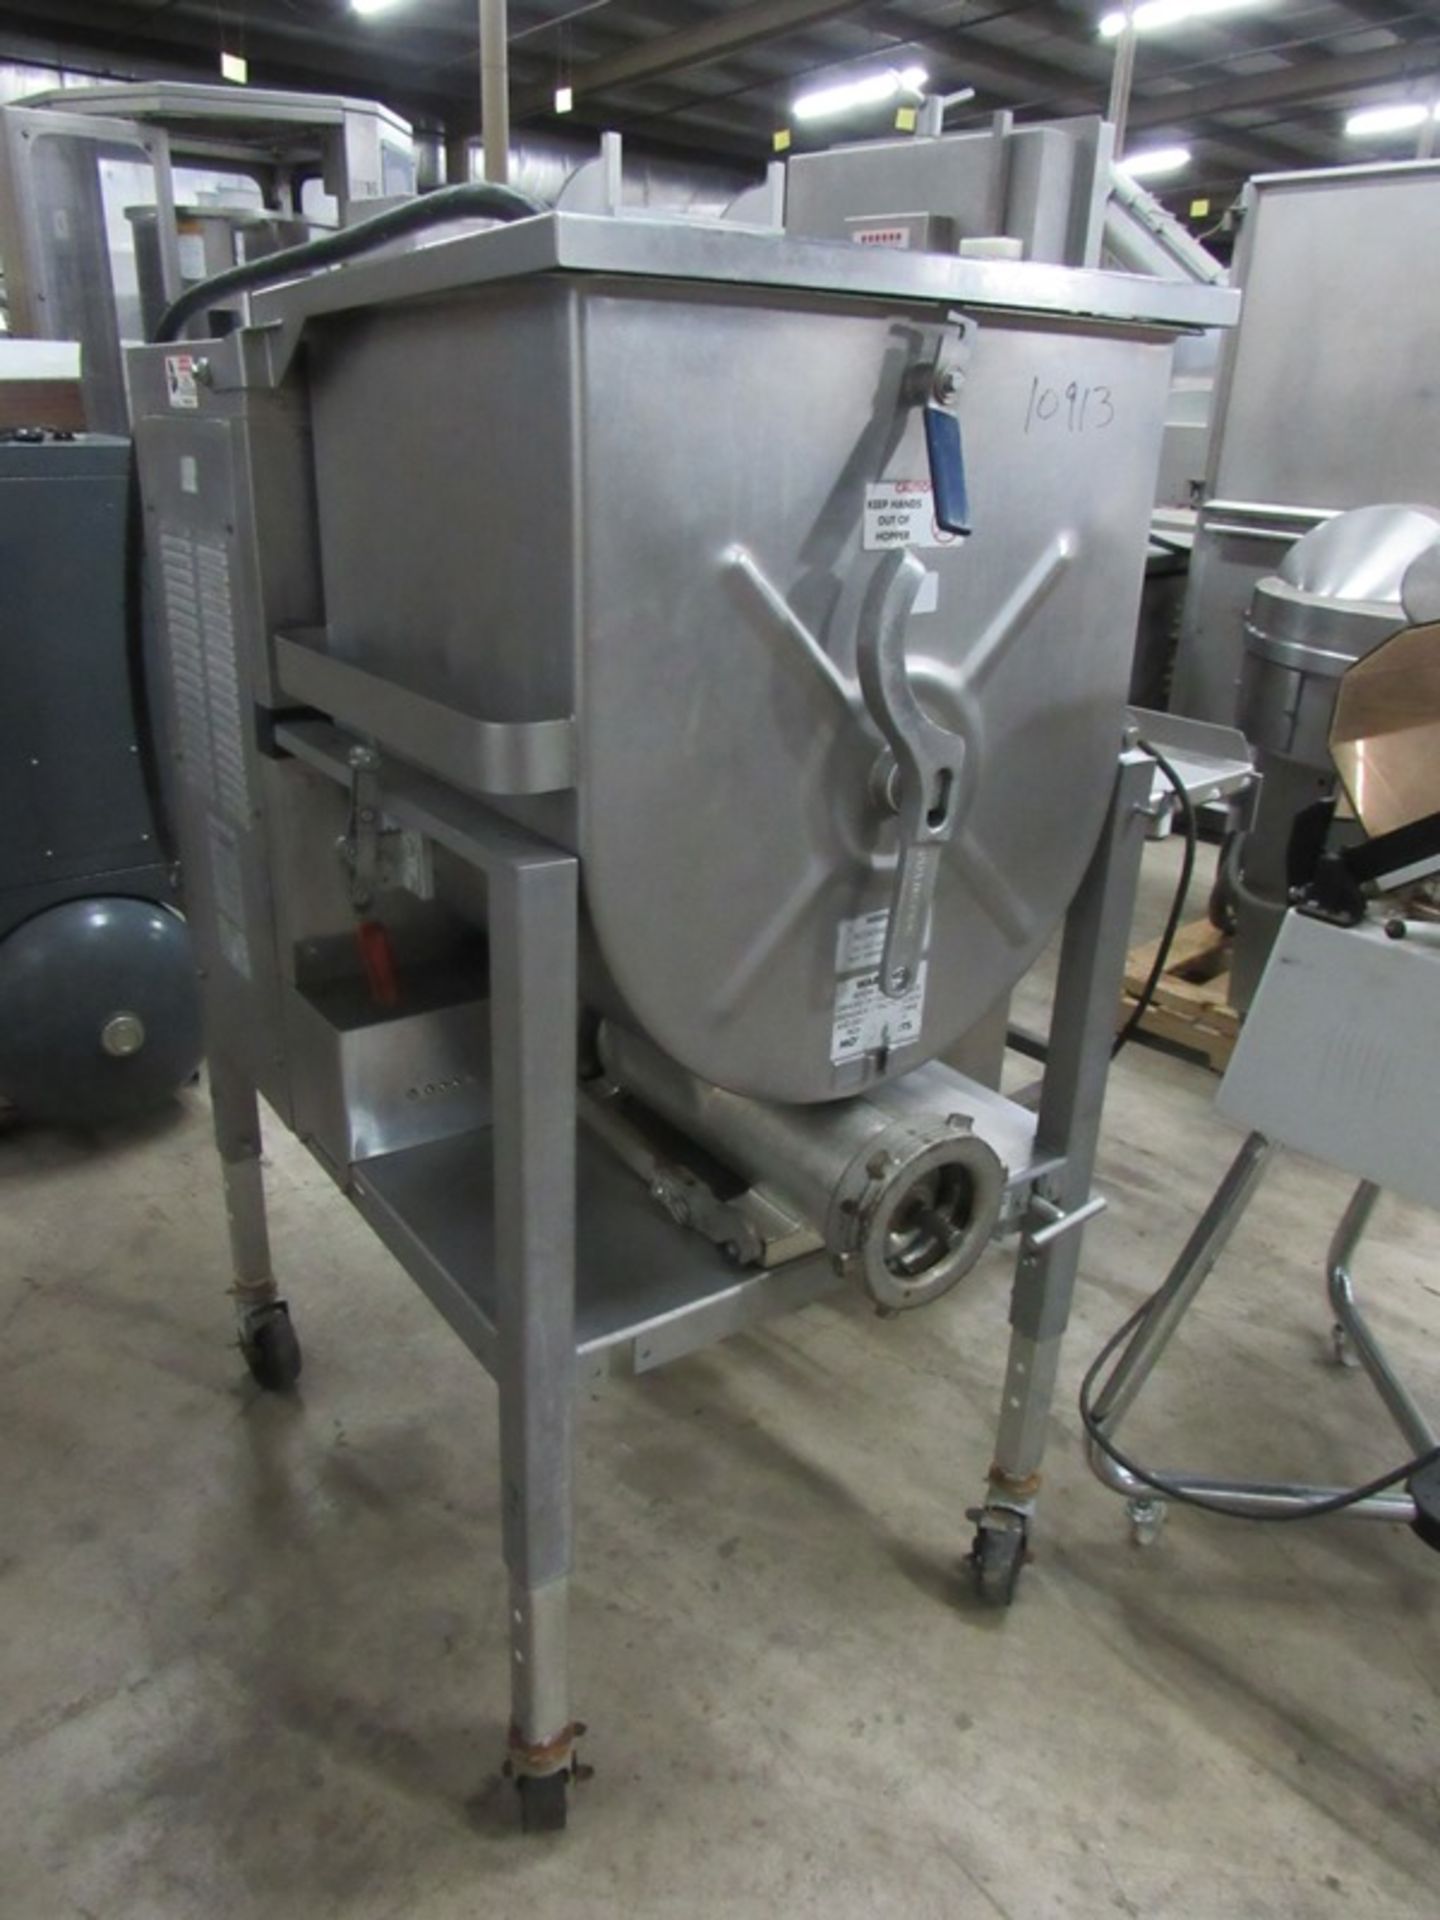 Hollymatic Mdl GMG180A Mixer/Grinder, 230 volts, 3 phase - ***All Monies must be received by Friday - Image 2 of 5